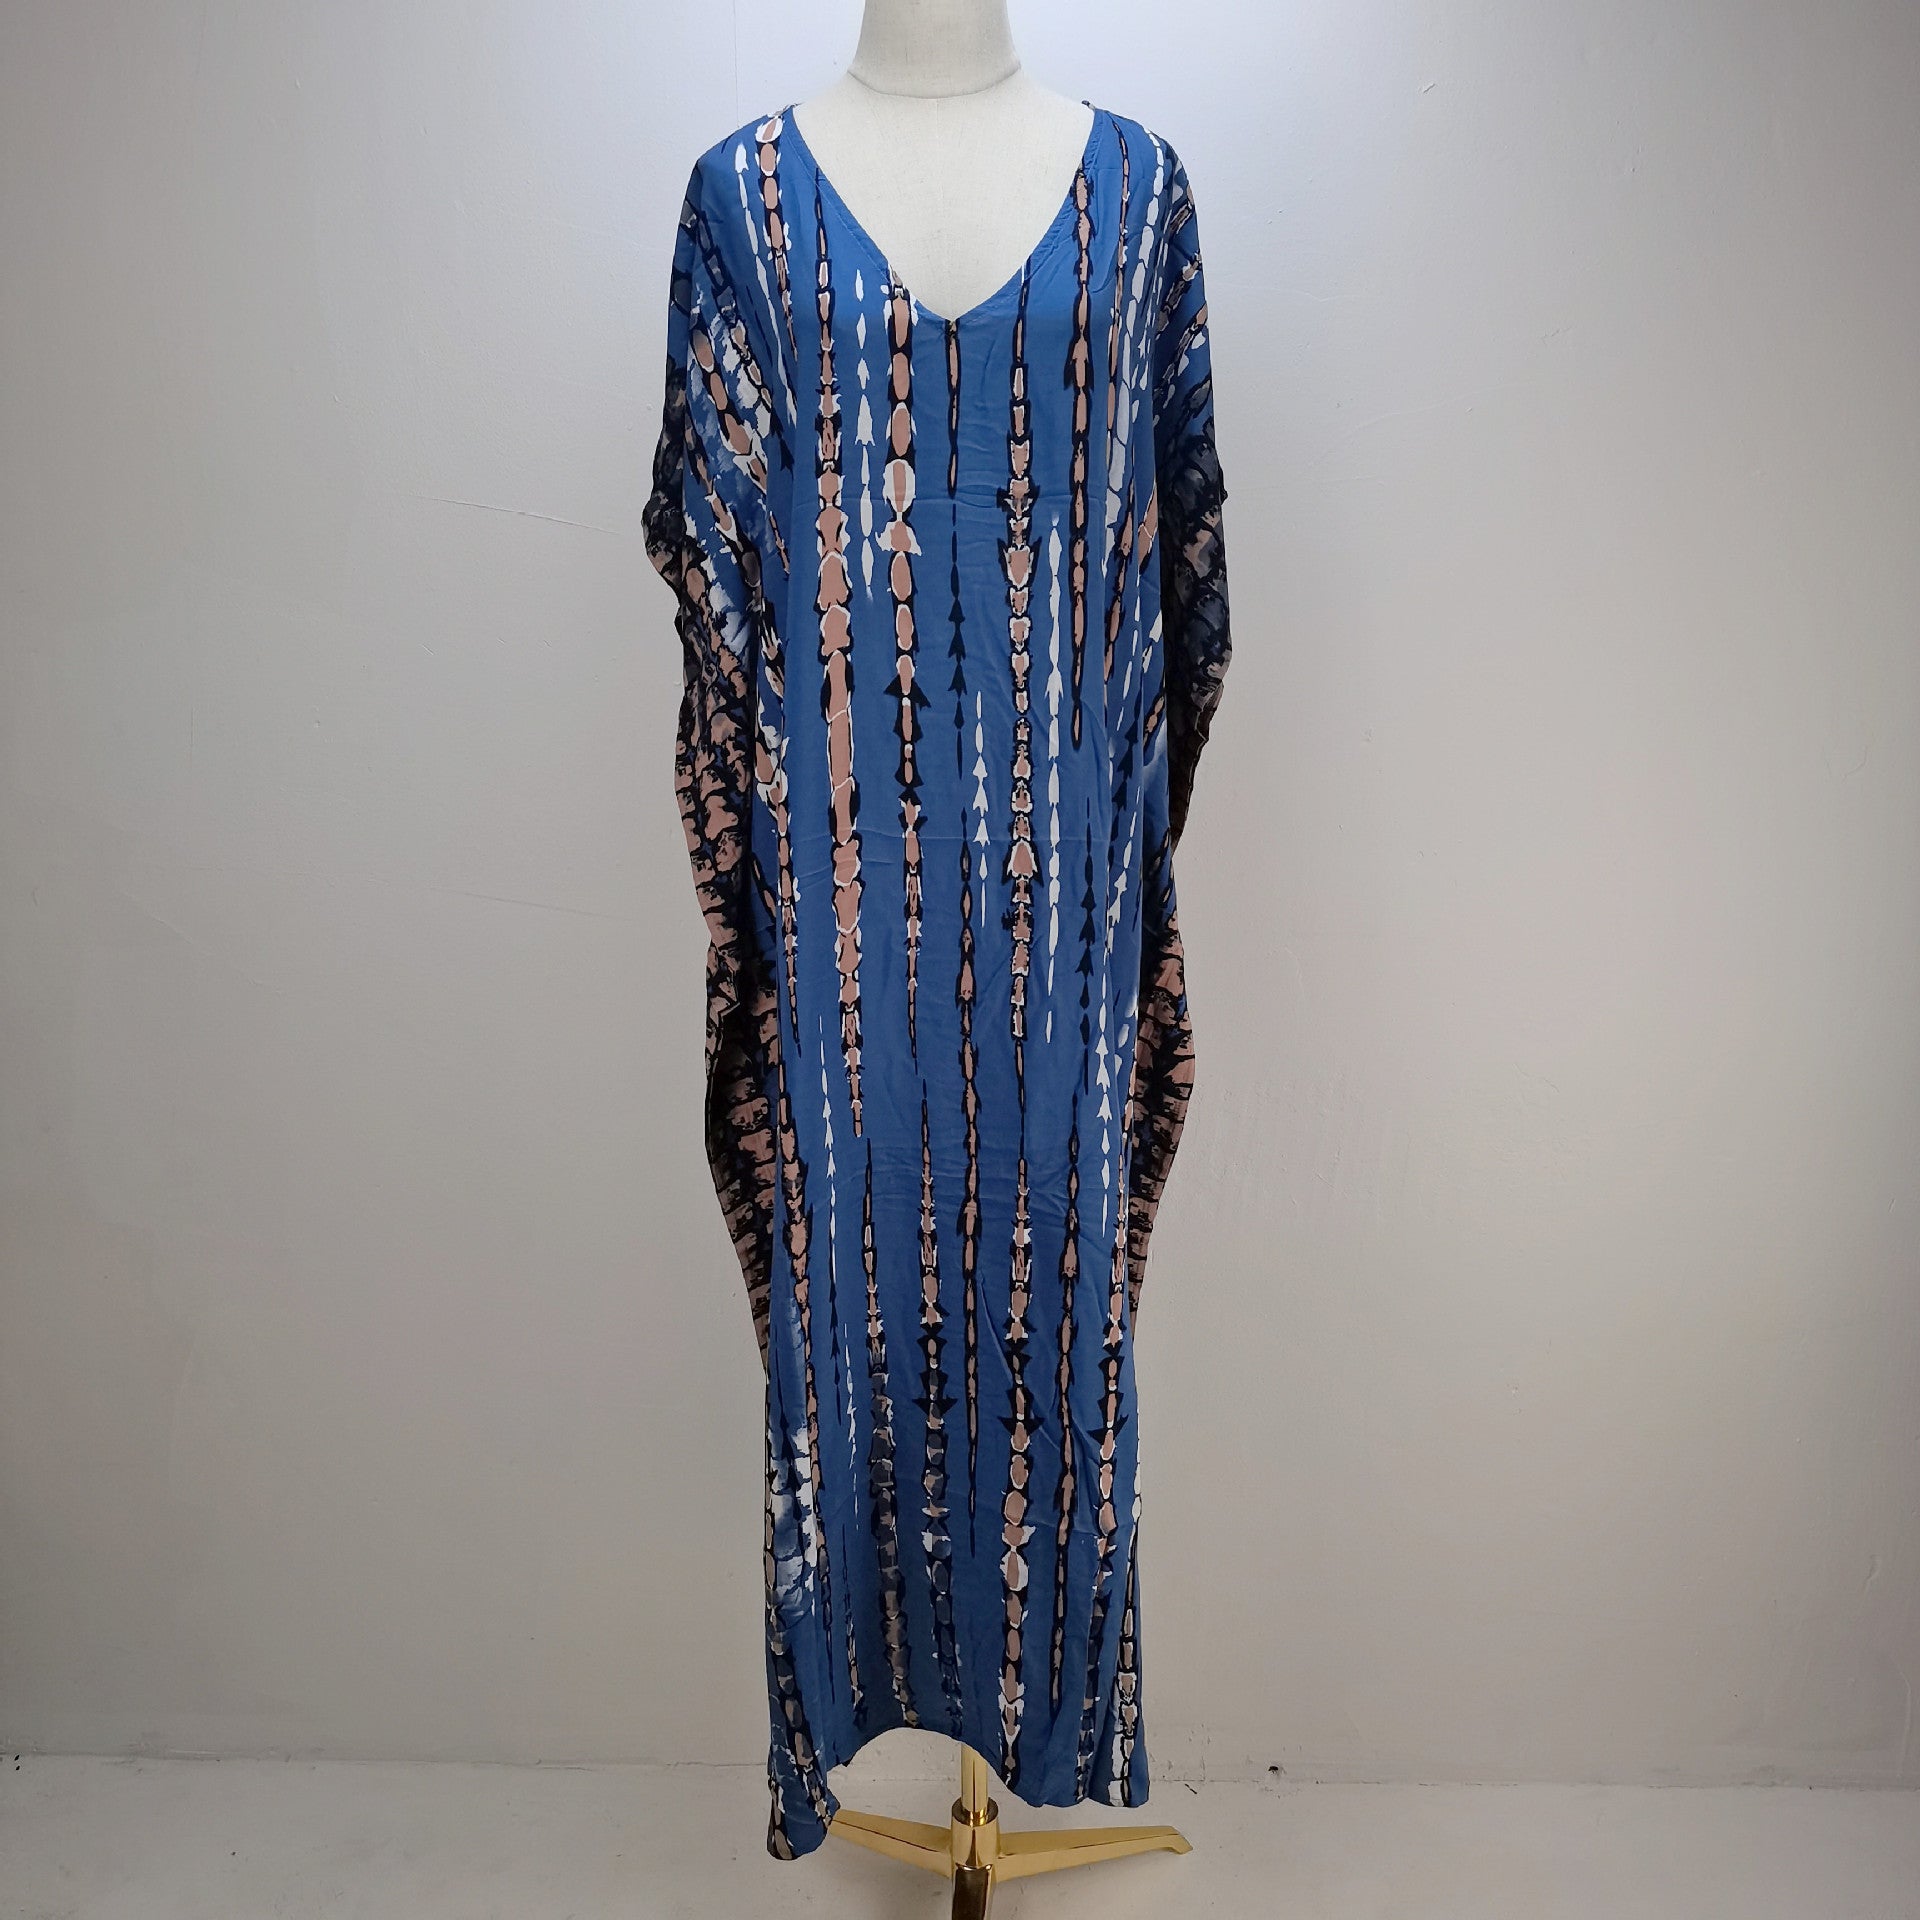 Cotton Beach Cover Up Printed Summer Dress